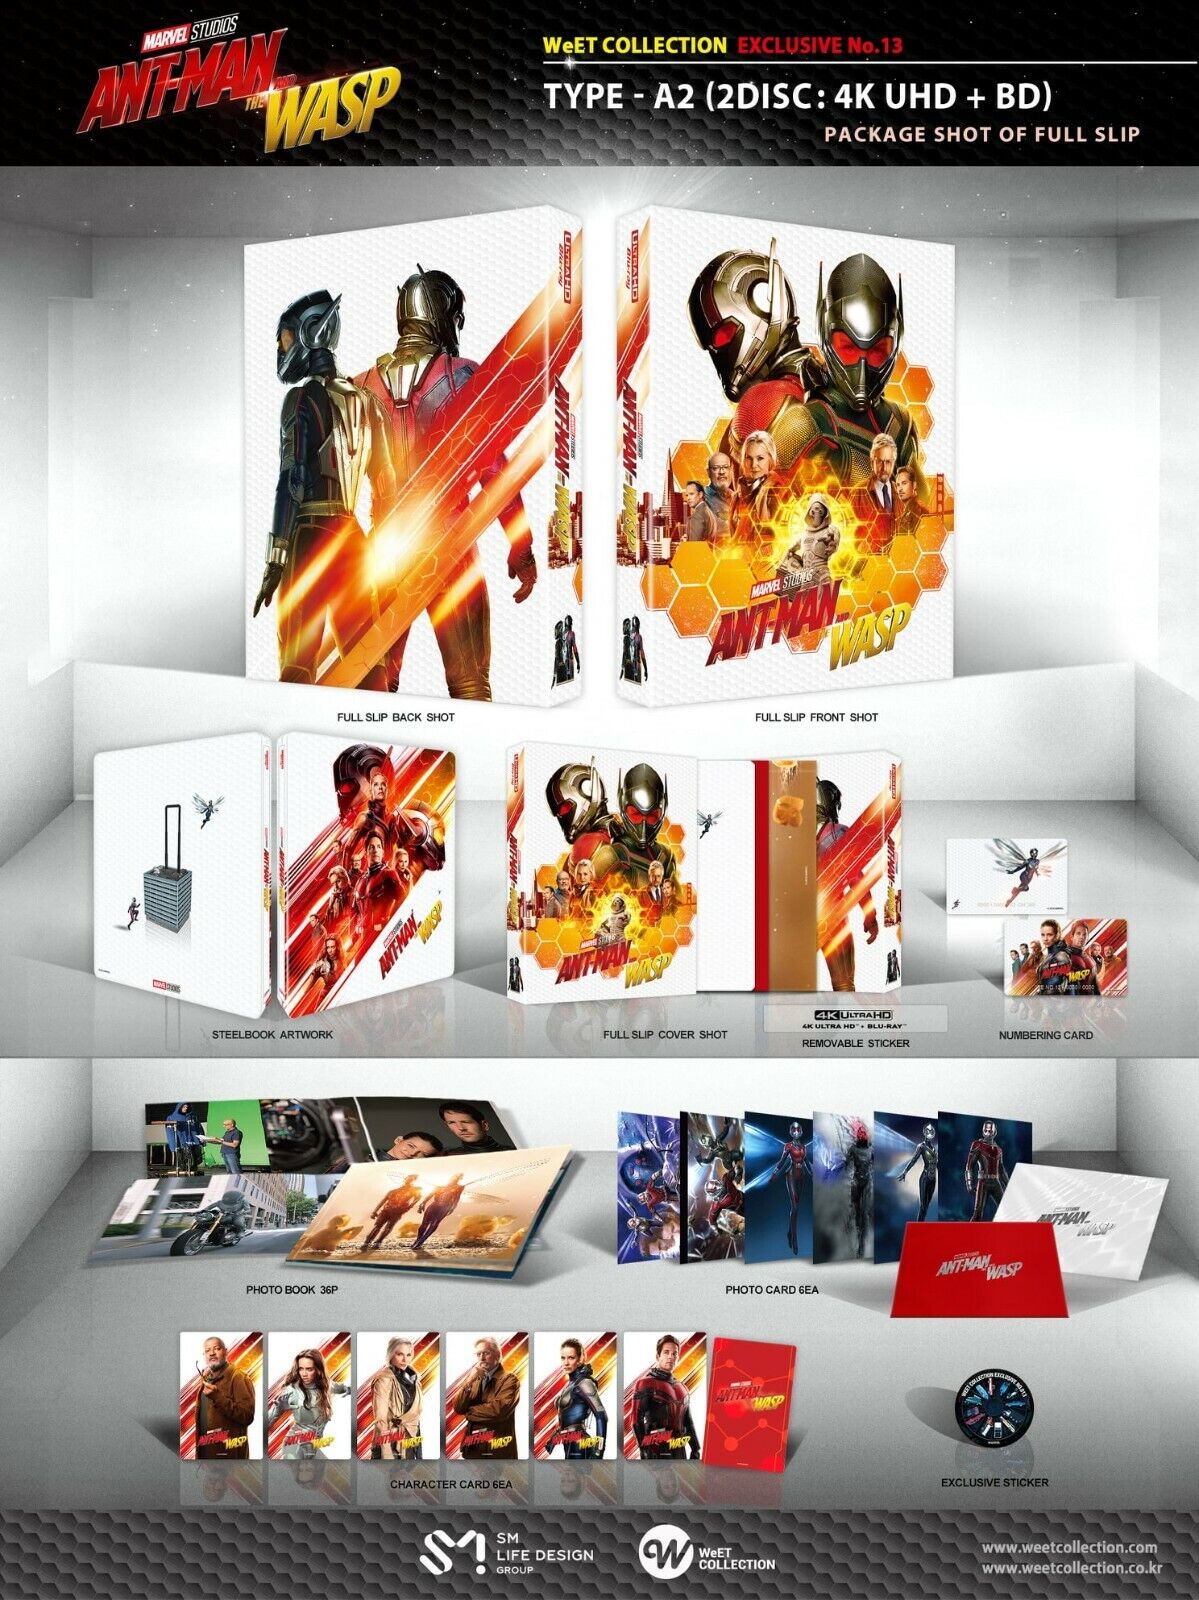 Ant-Man and the Wasp 4K+2D Steelbook WeET Collection Exclusive #13 Full Slip A2